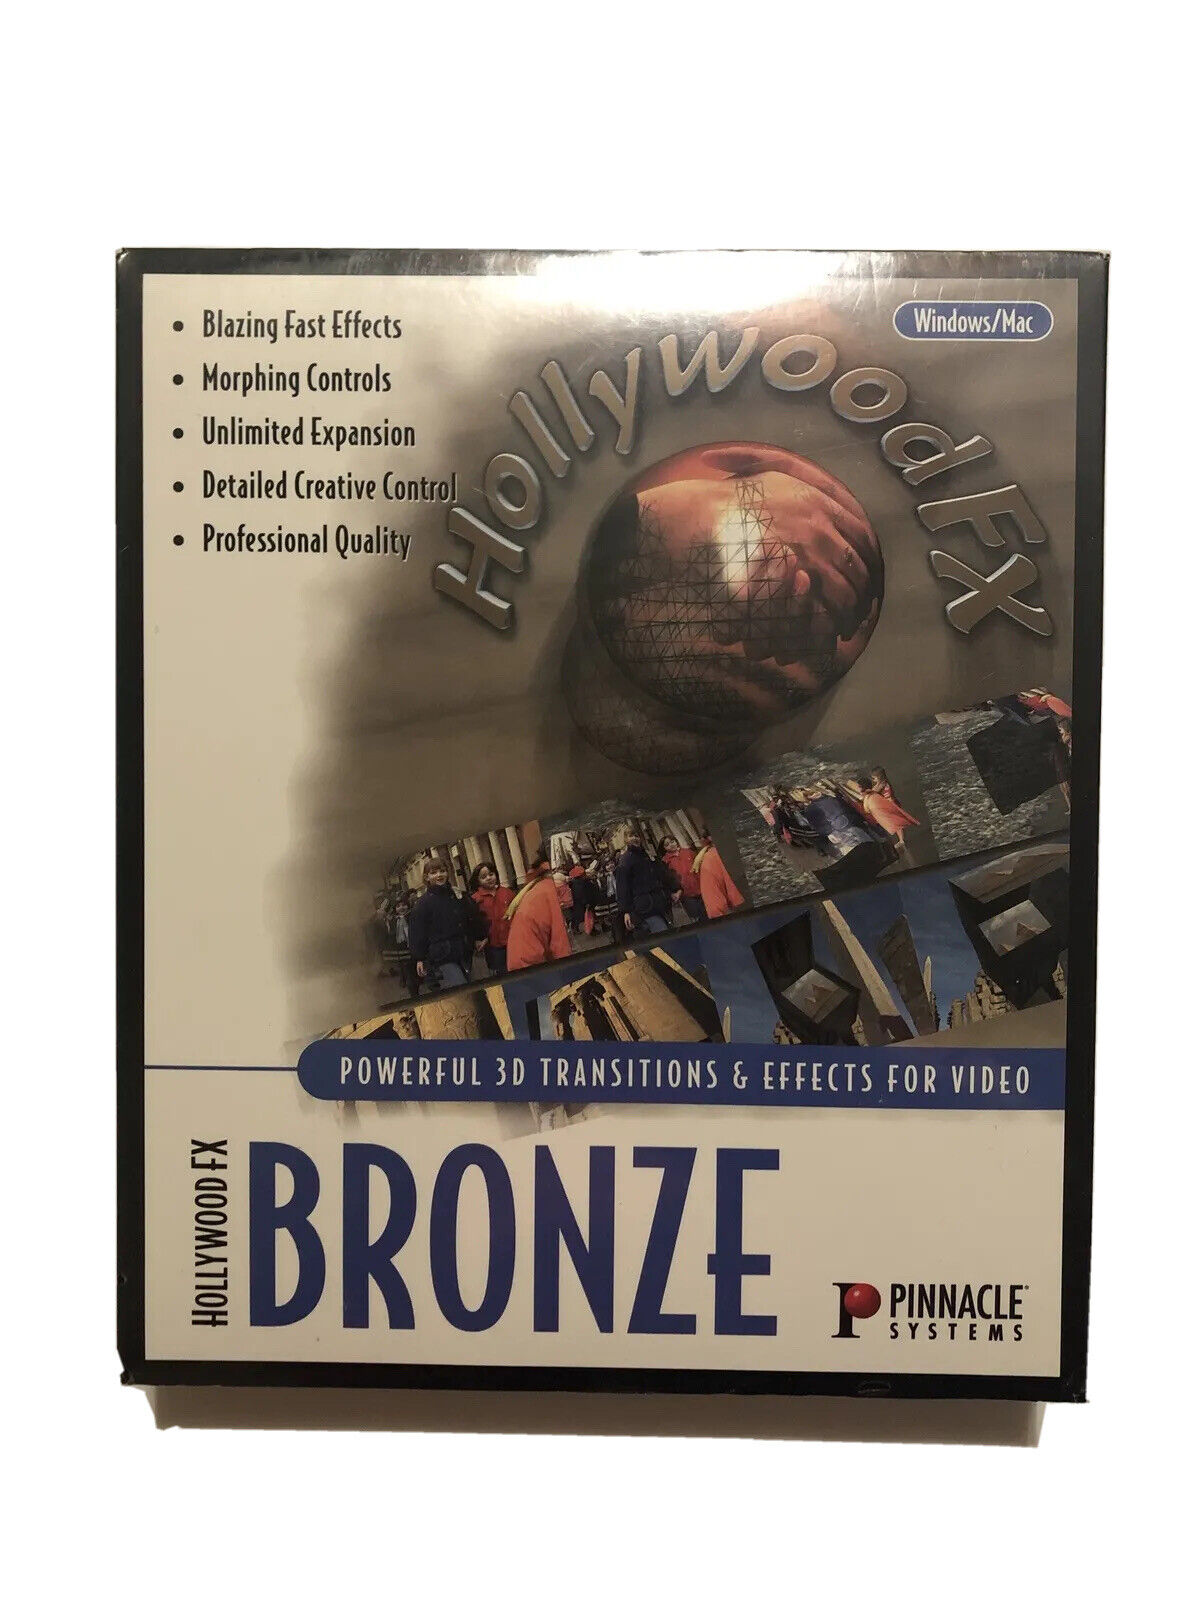 Hollywood Fx Bronze 3D Digital Effects for Video New